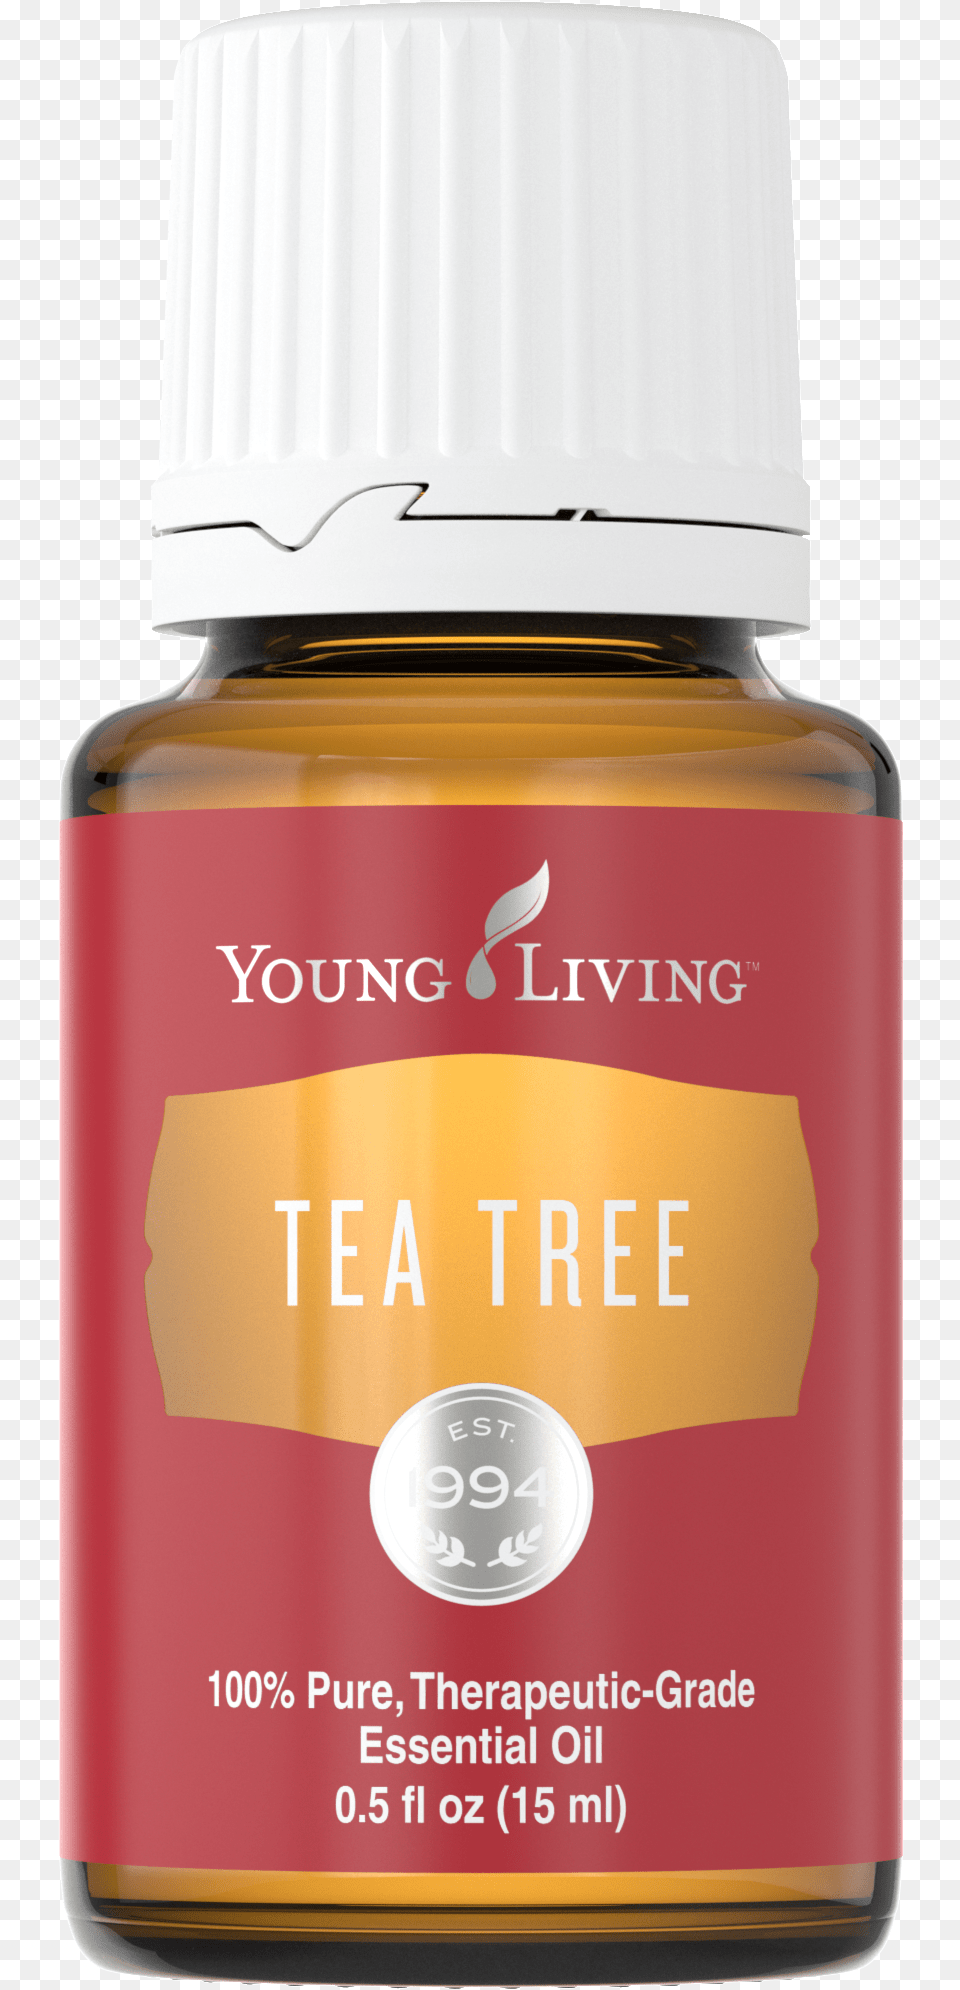 Tea Tree Peppermint 15ml Young Living, Bottle, Cosmetics, Perfume Free Png Download